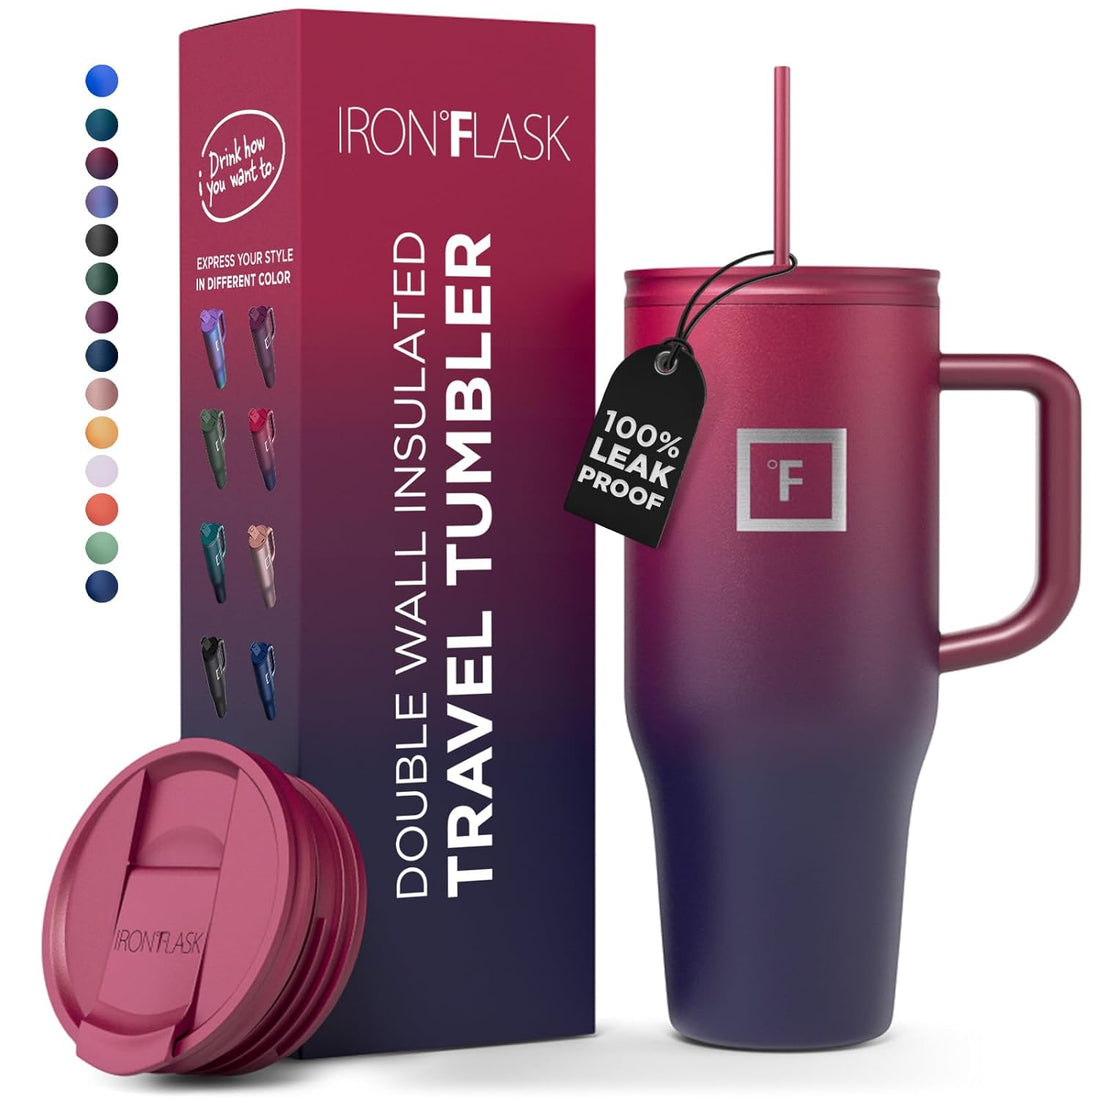 IRON °FLASK Co-Pilot 40 oz Insulated Tumbler w/Straw & Flip Cap Lids - Cup Holder Bottle for Hot, Cold Drink - Leak-Proof - Water, Coffee Portable Travel Mug - Valentines Day Gifts - Dark Rainbow